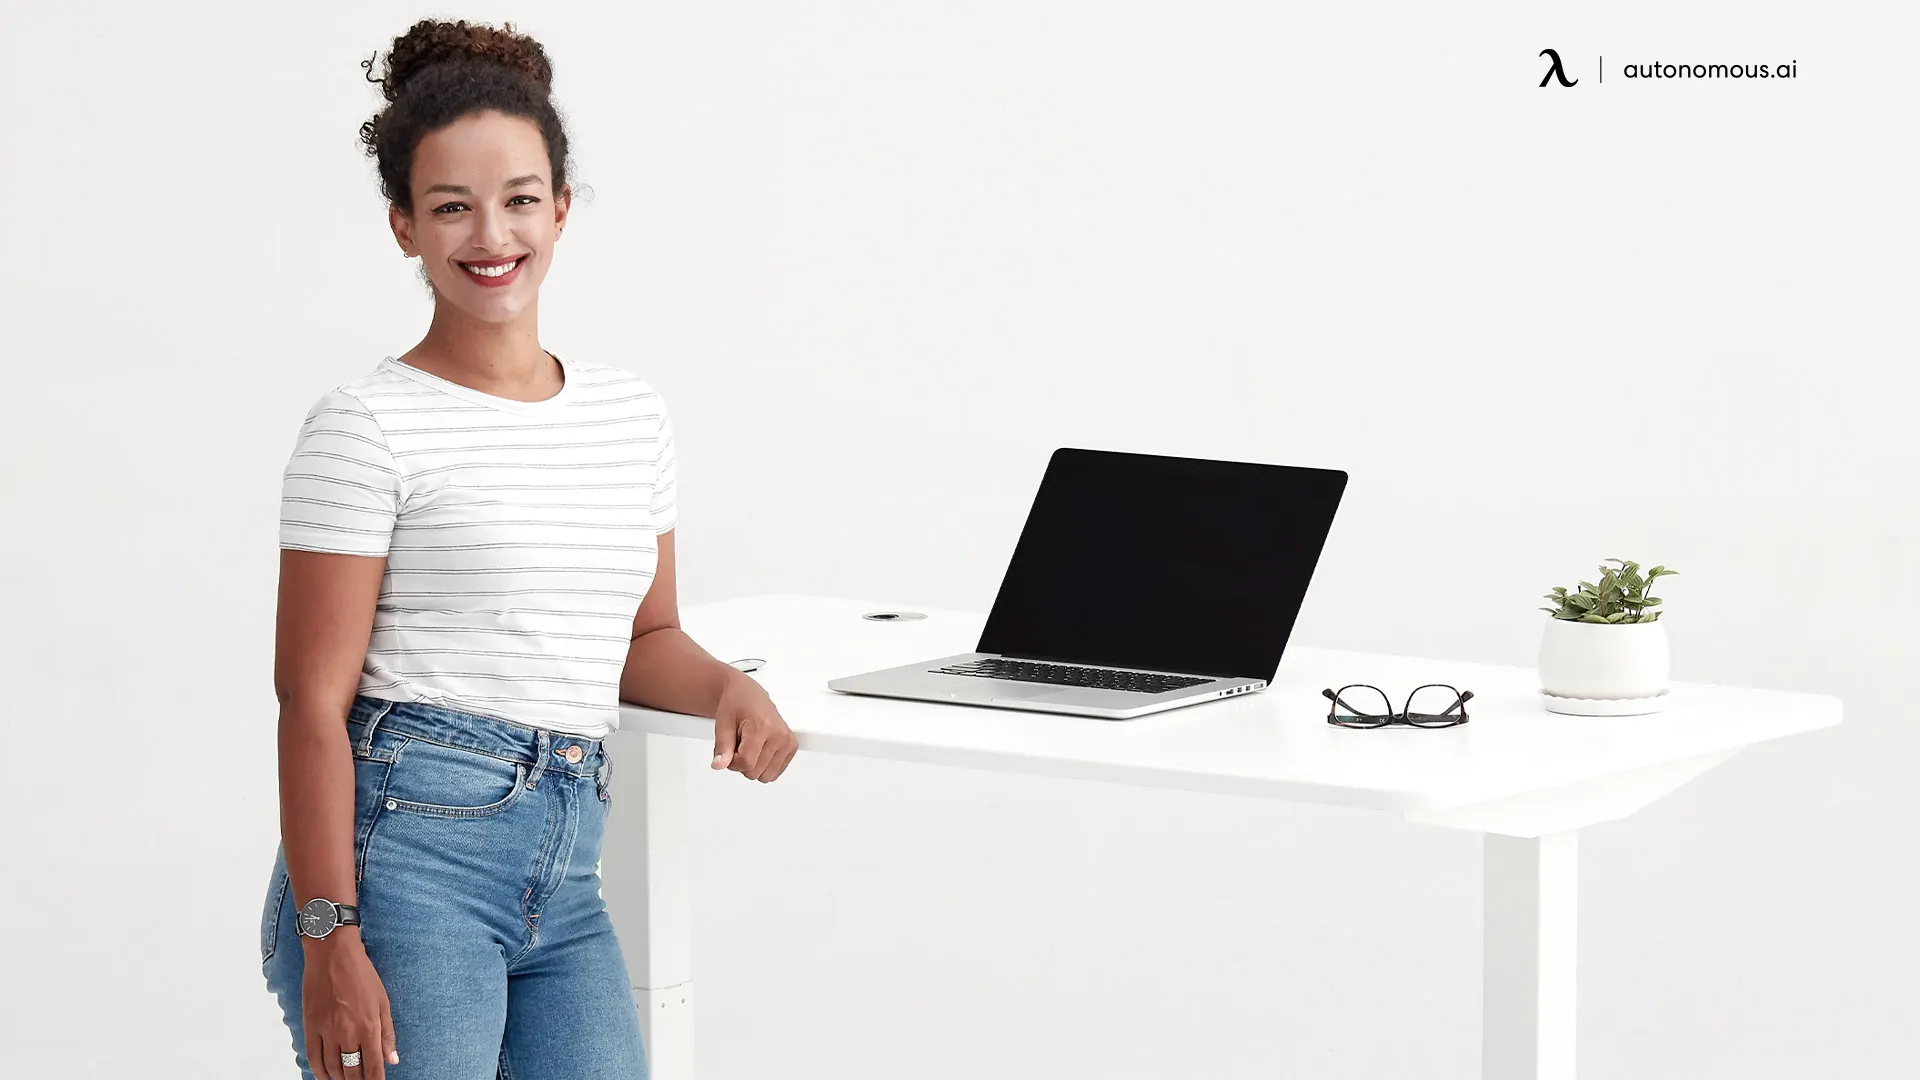 The Benefits of a Standing Desk